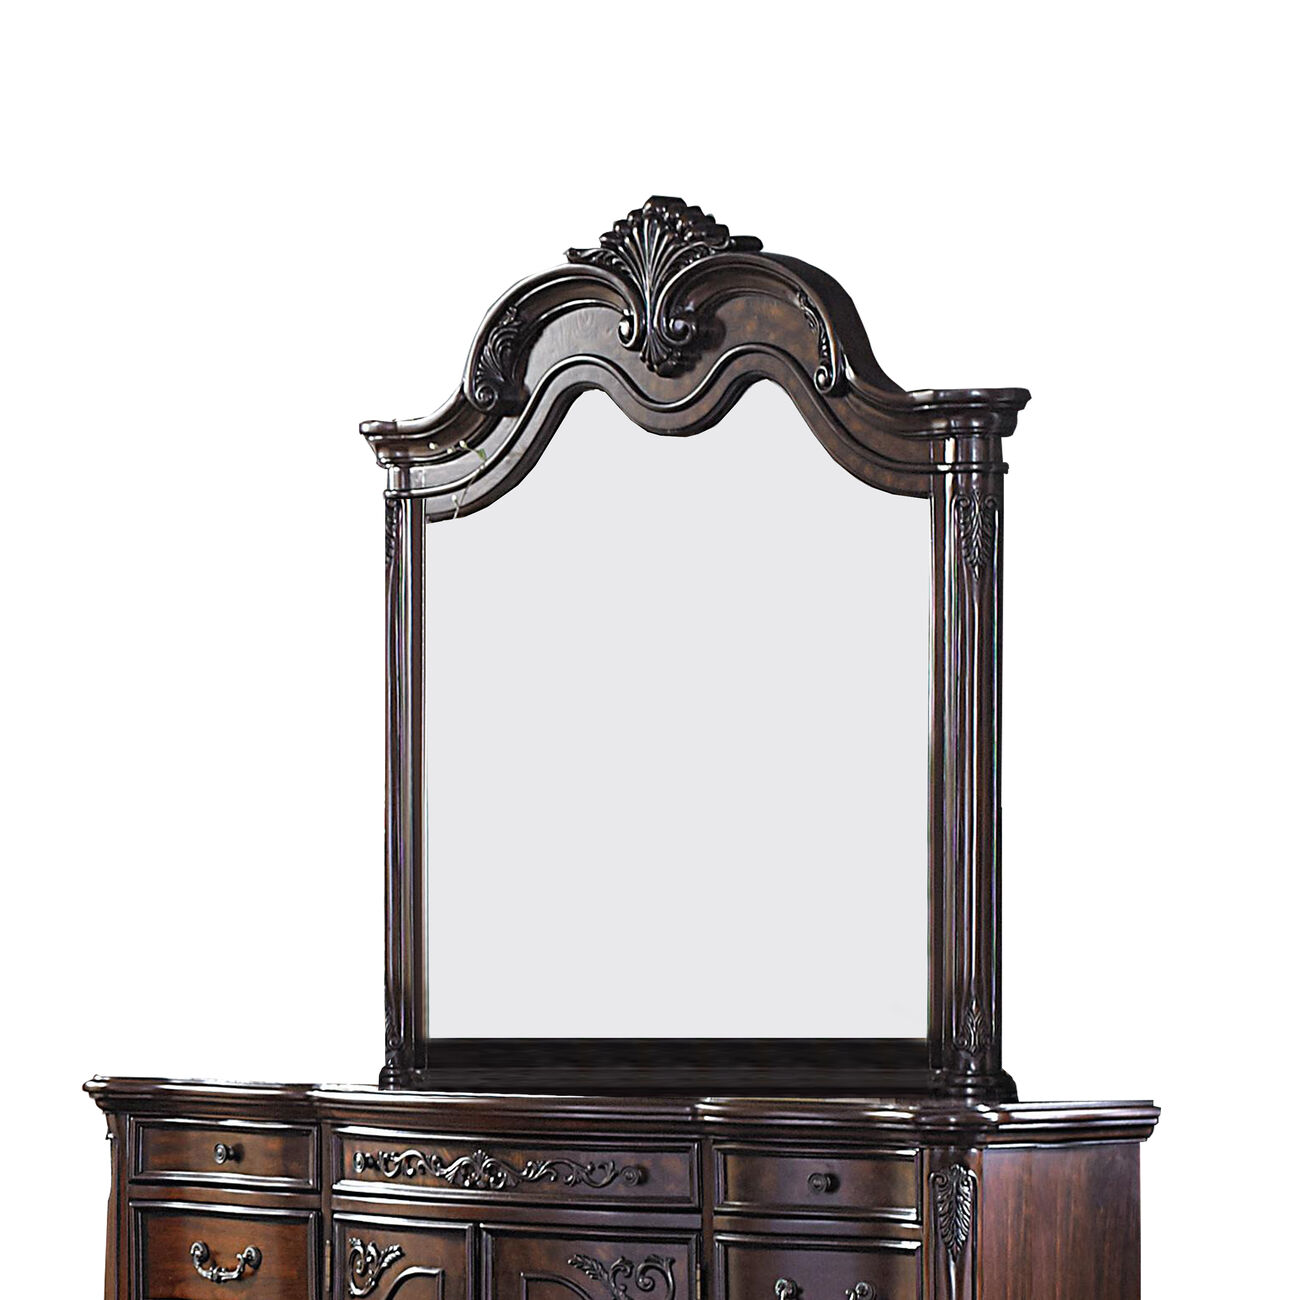 Traditional Style Wooden Dresser Mirror with Engraved Details, Cherry Brown